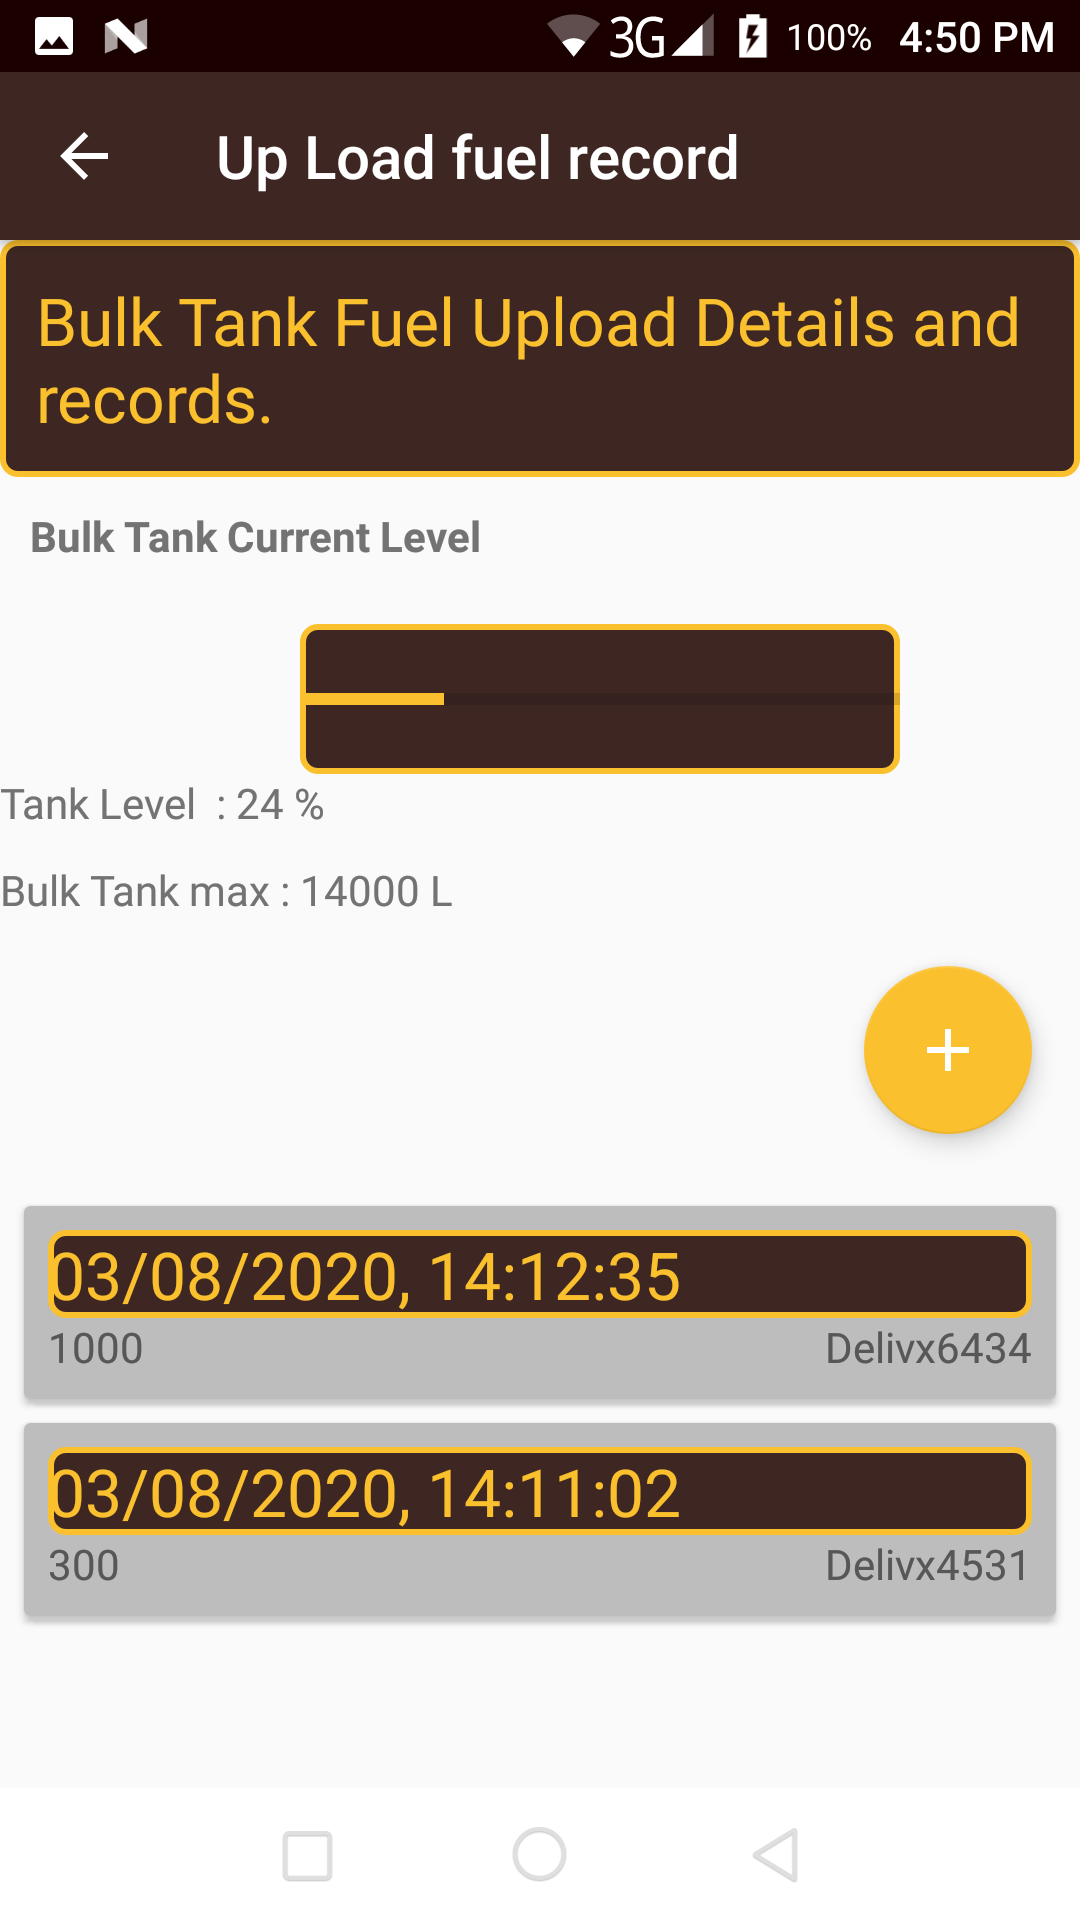 Liquitrack Fuel Record App, showing a fuel Upload to a bulk tank on site.